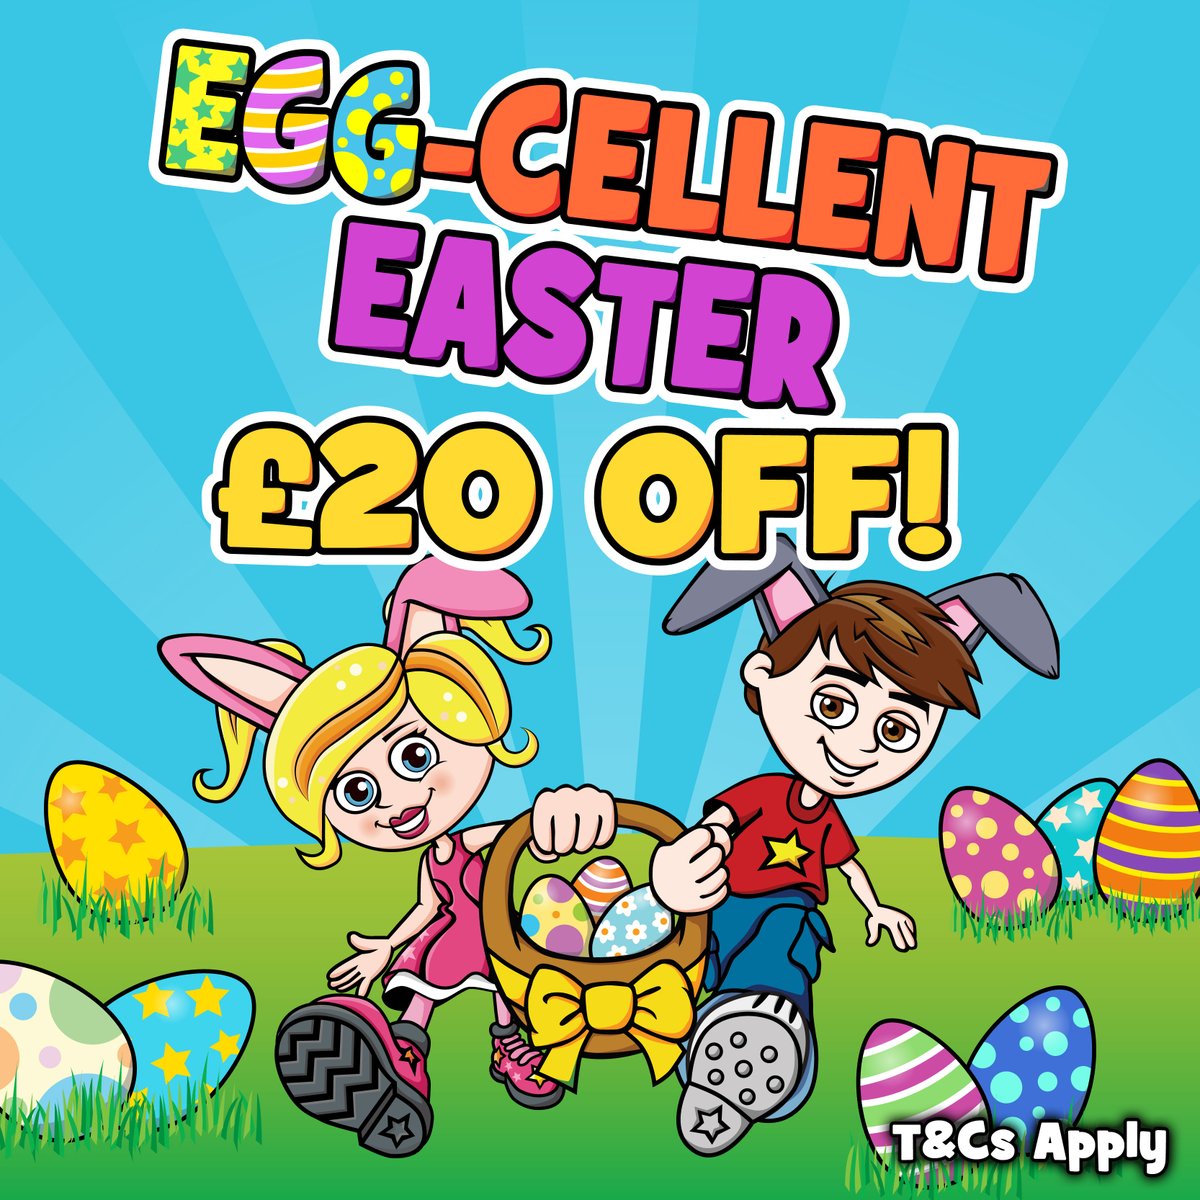 🐥HAVE AN EGG-CELLENT EASTER WITH £20 OFF! 🐥 We have a crackin' offer we think you'll love this Easter! Book an egg-citing kids party using the discount code EASTER20 between the 23rd March - 14th April 2024 to get £20 off!* *T&Cs apply: dnakids.co.uk/offers/ #easter2024